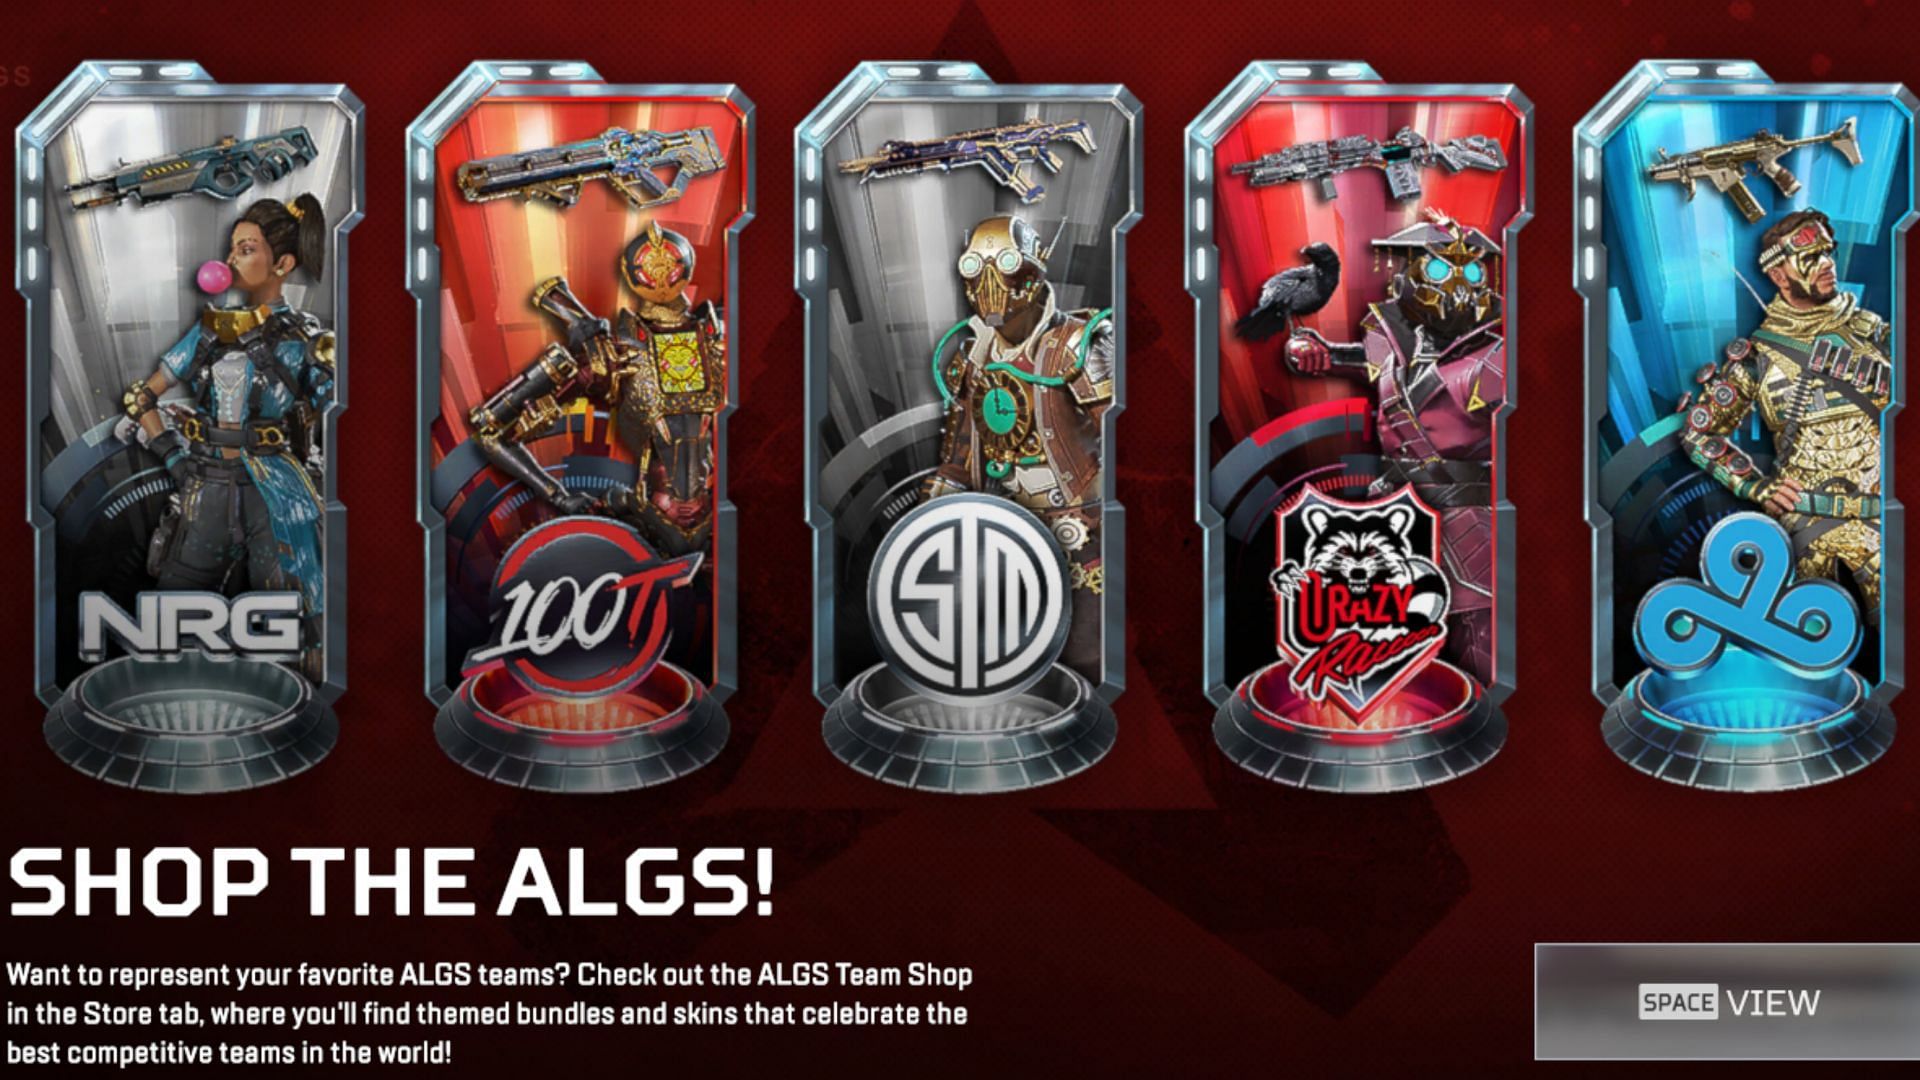 100 Thieves on X: Today's Thieves of Apex Legends features